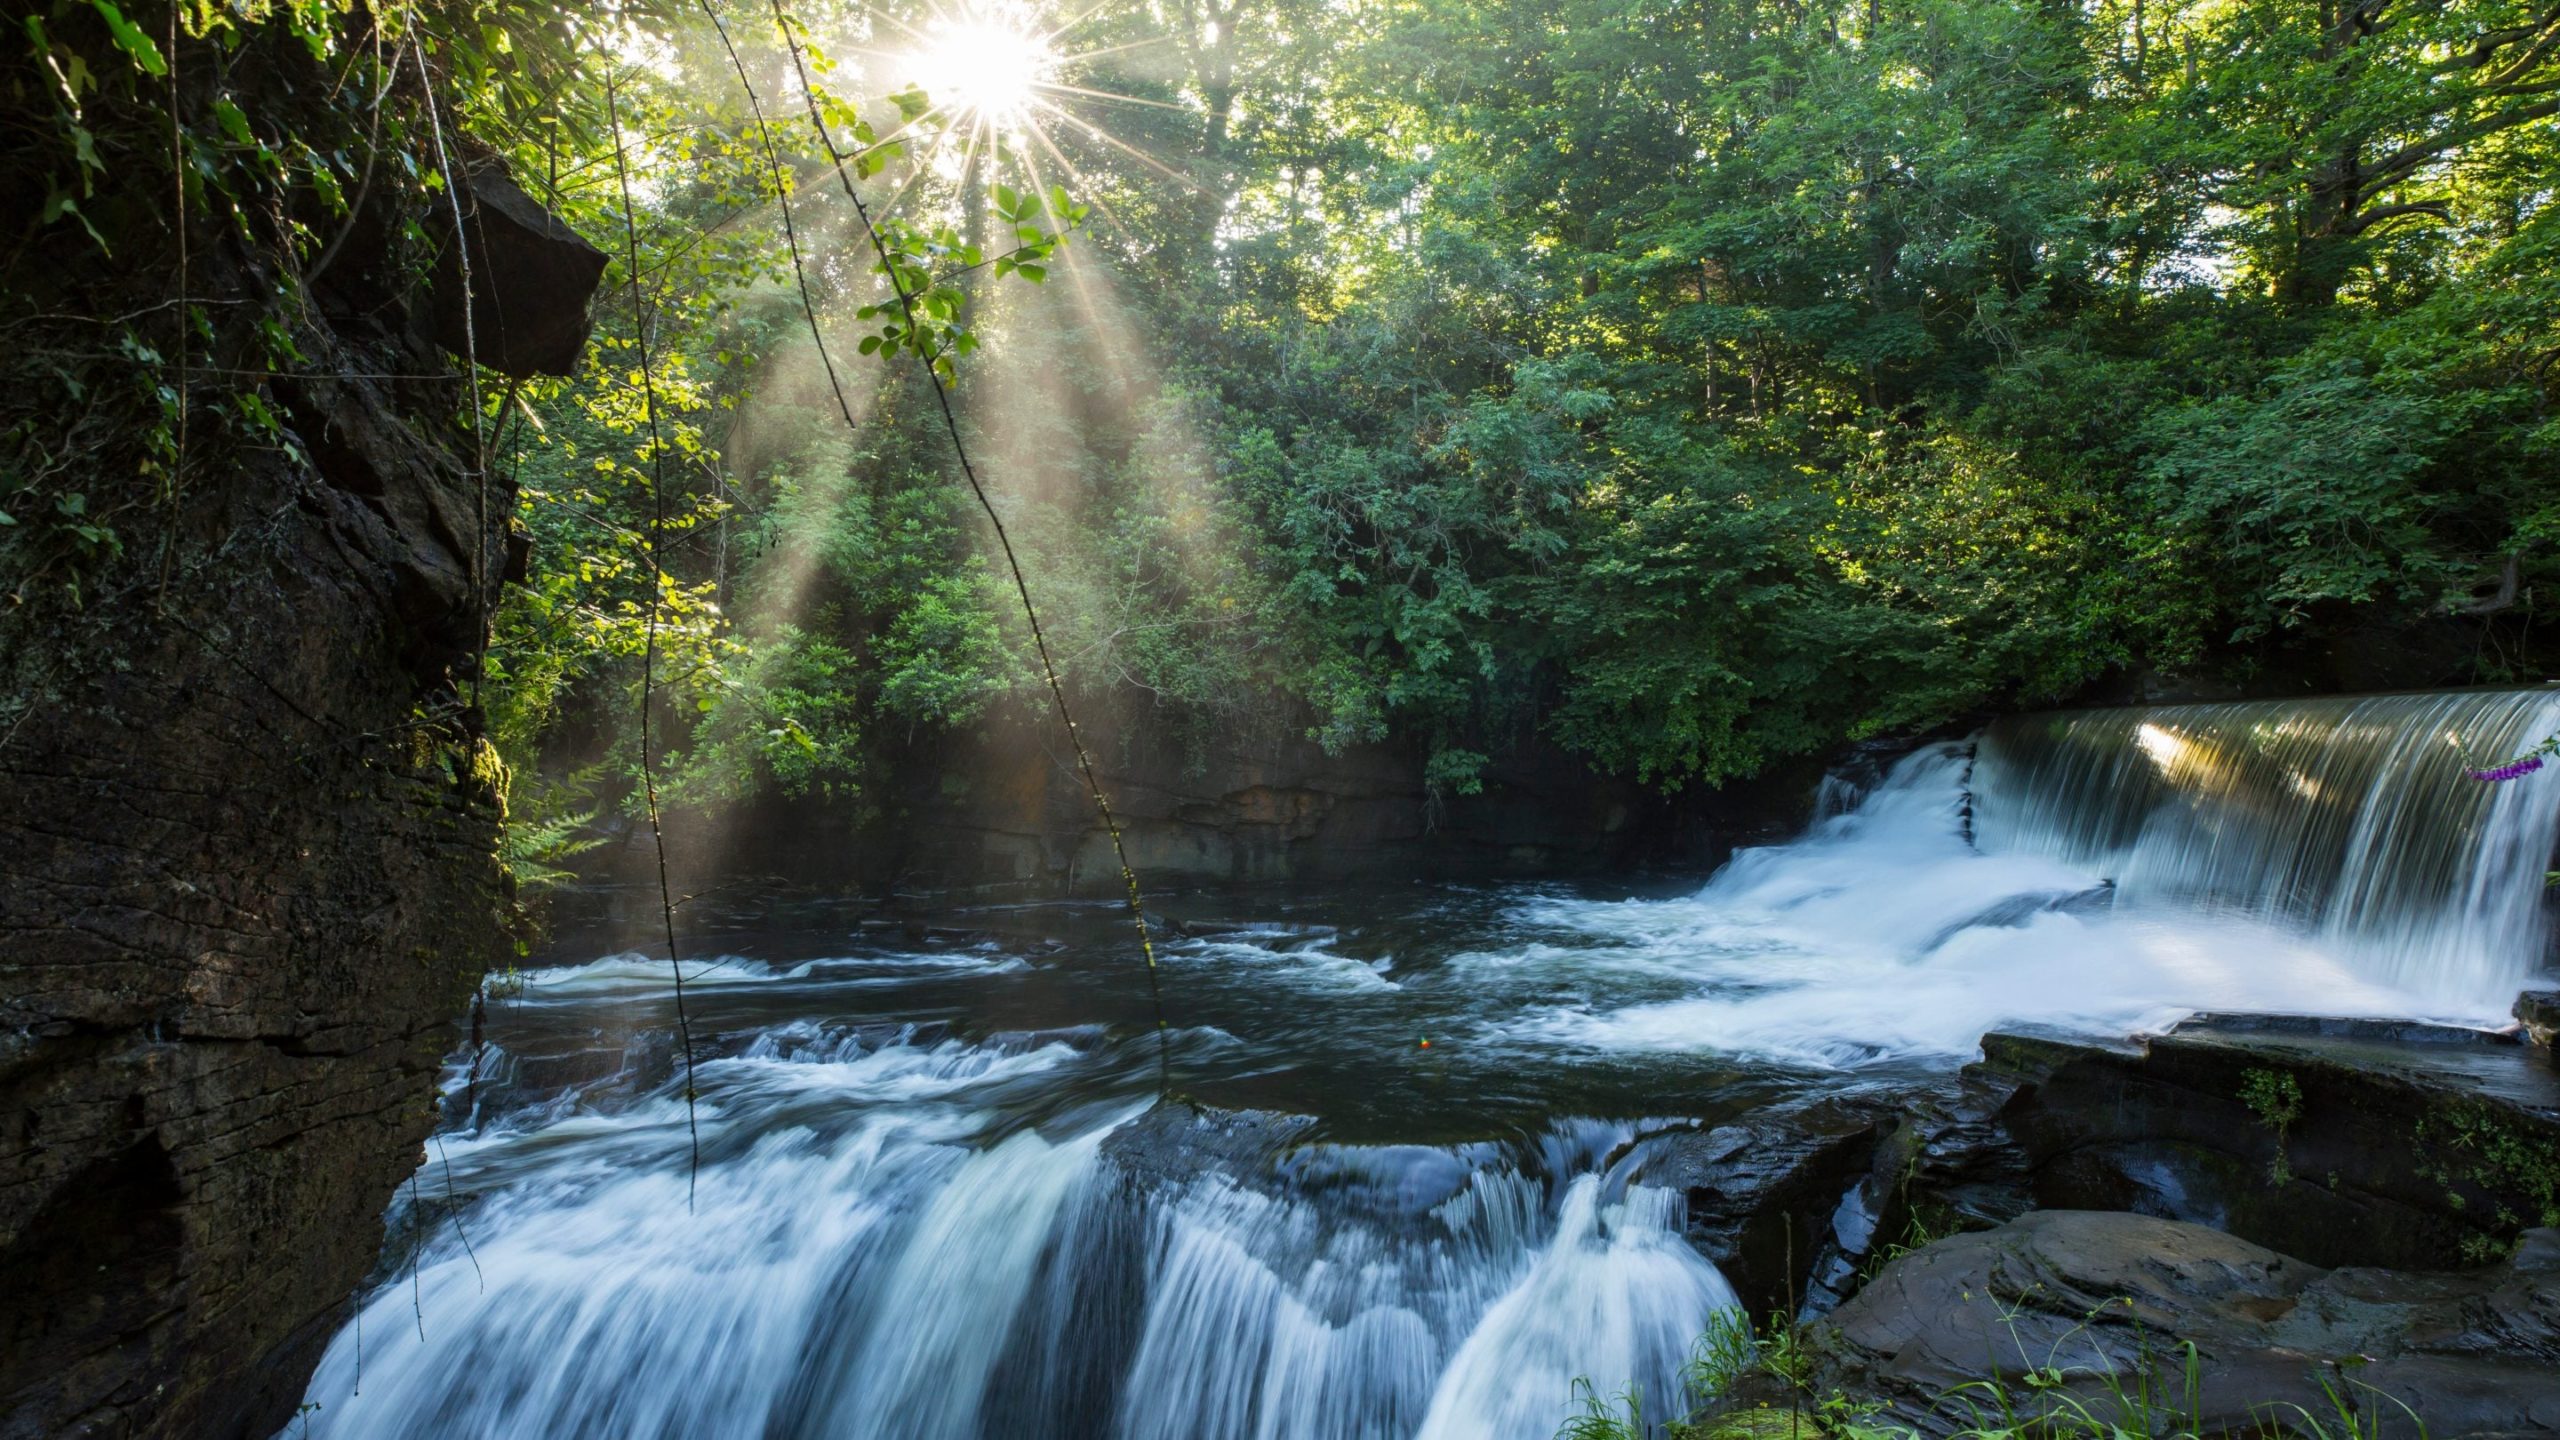 water flowing down rocks among trees with sun coming through leaves